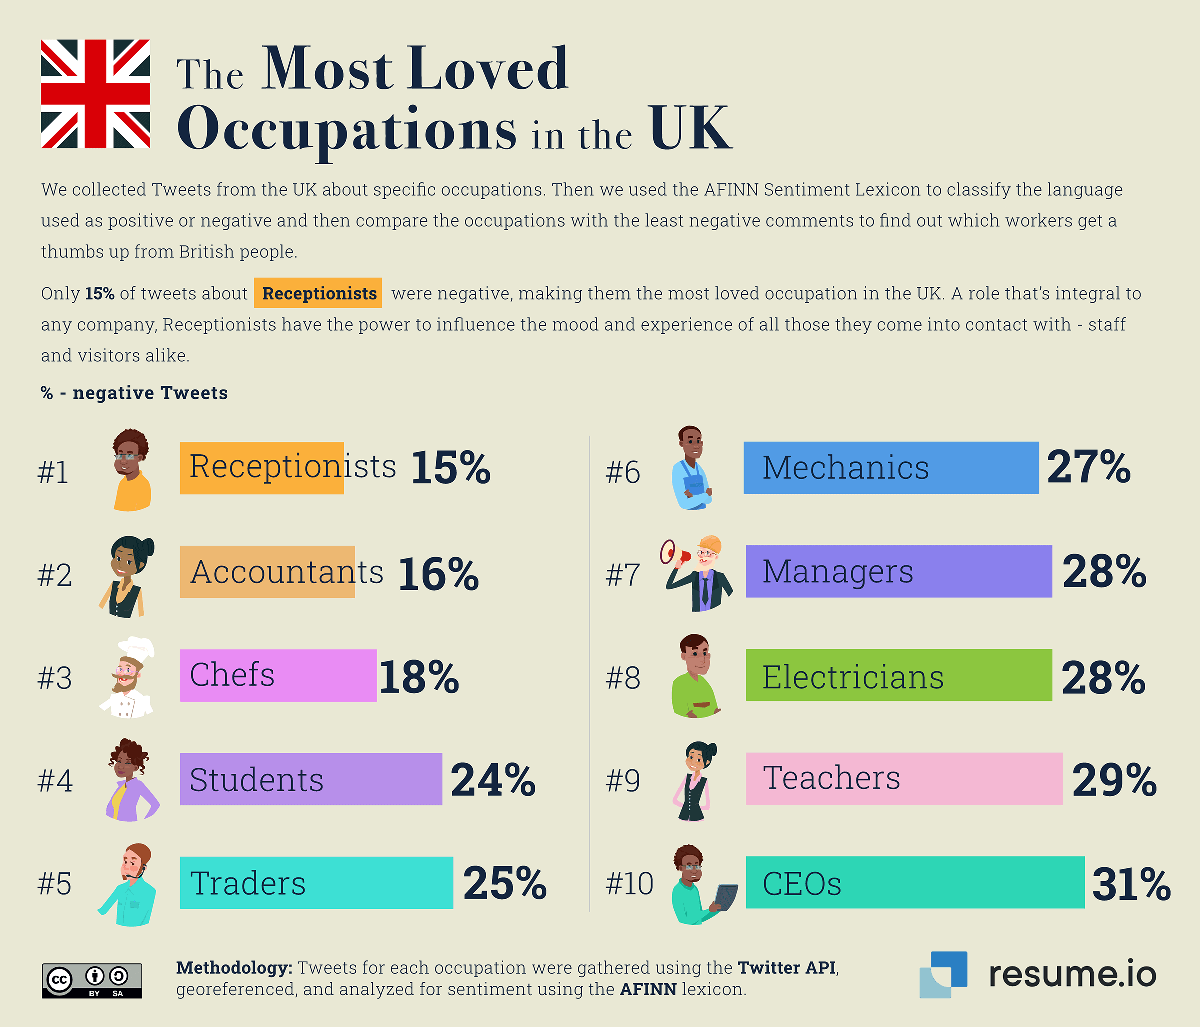 The most loved occupations in the UK.